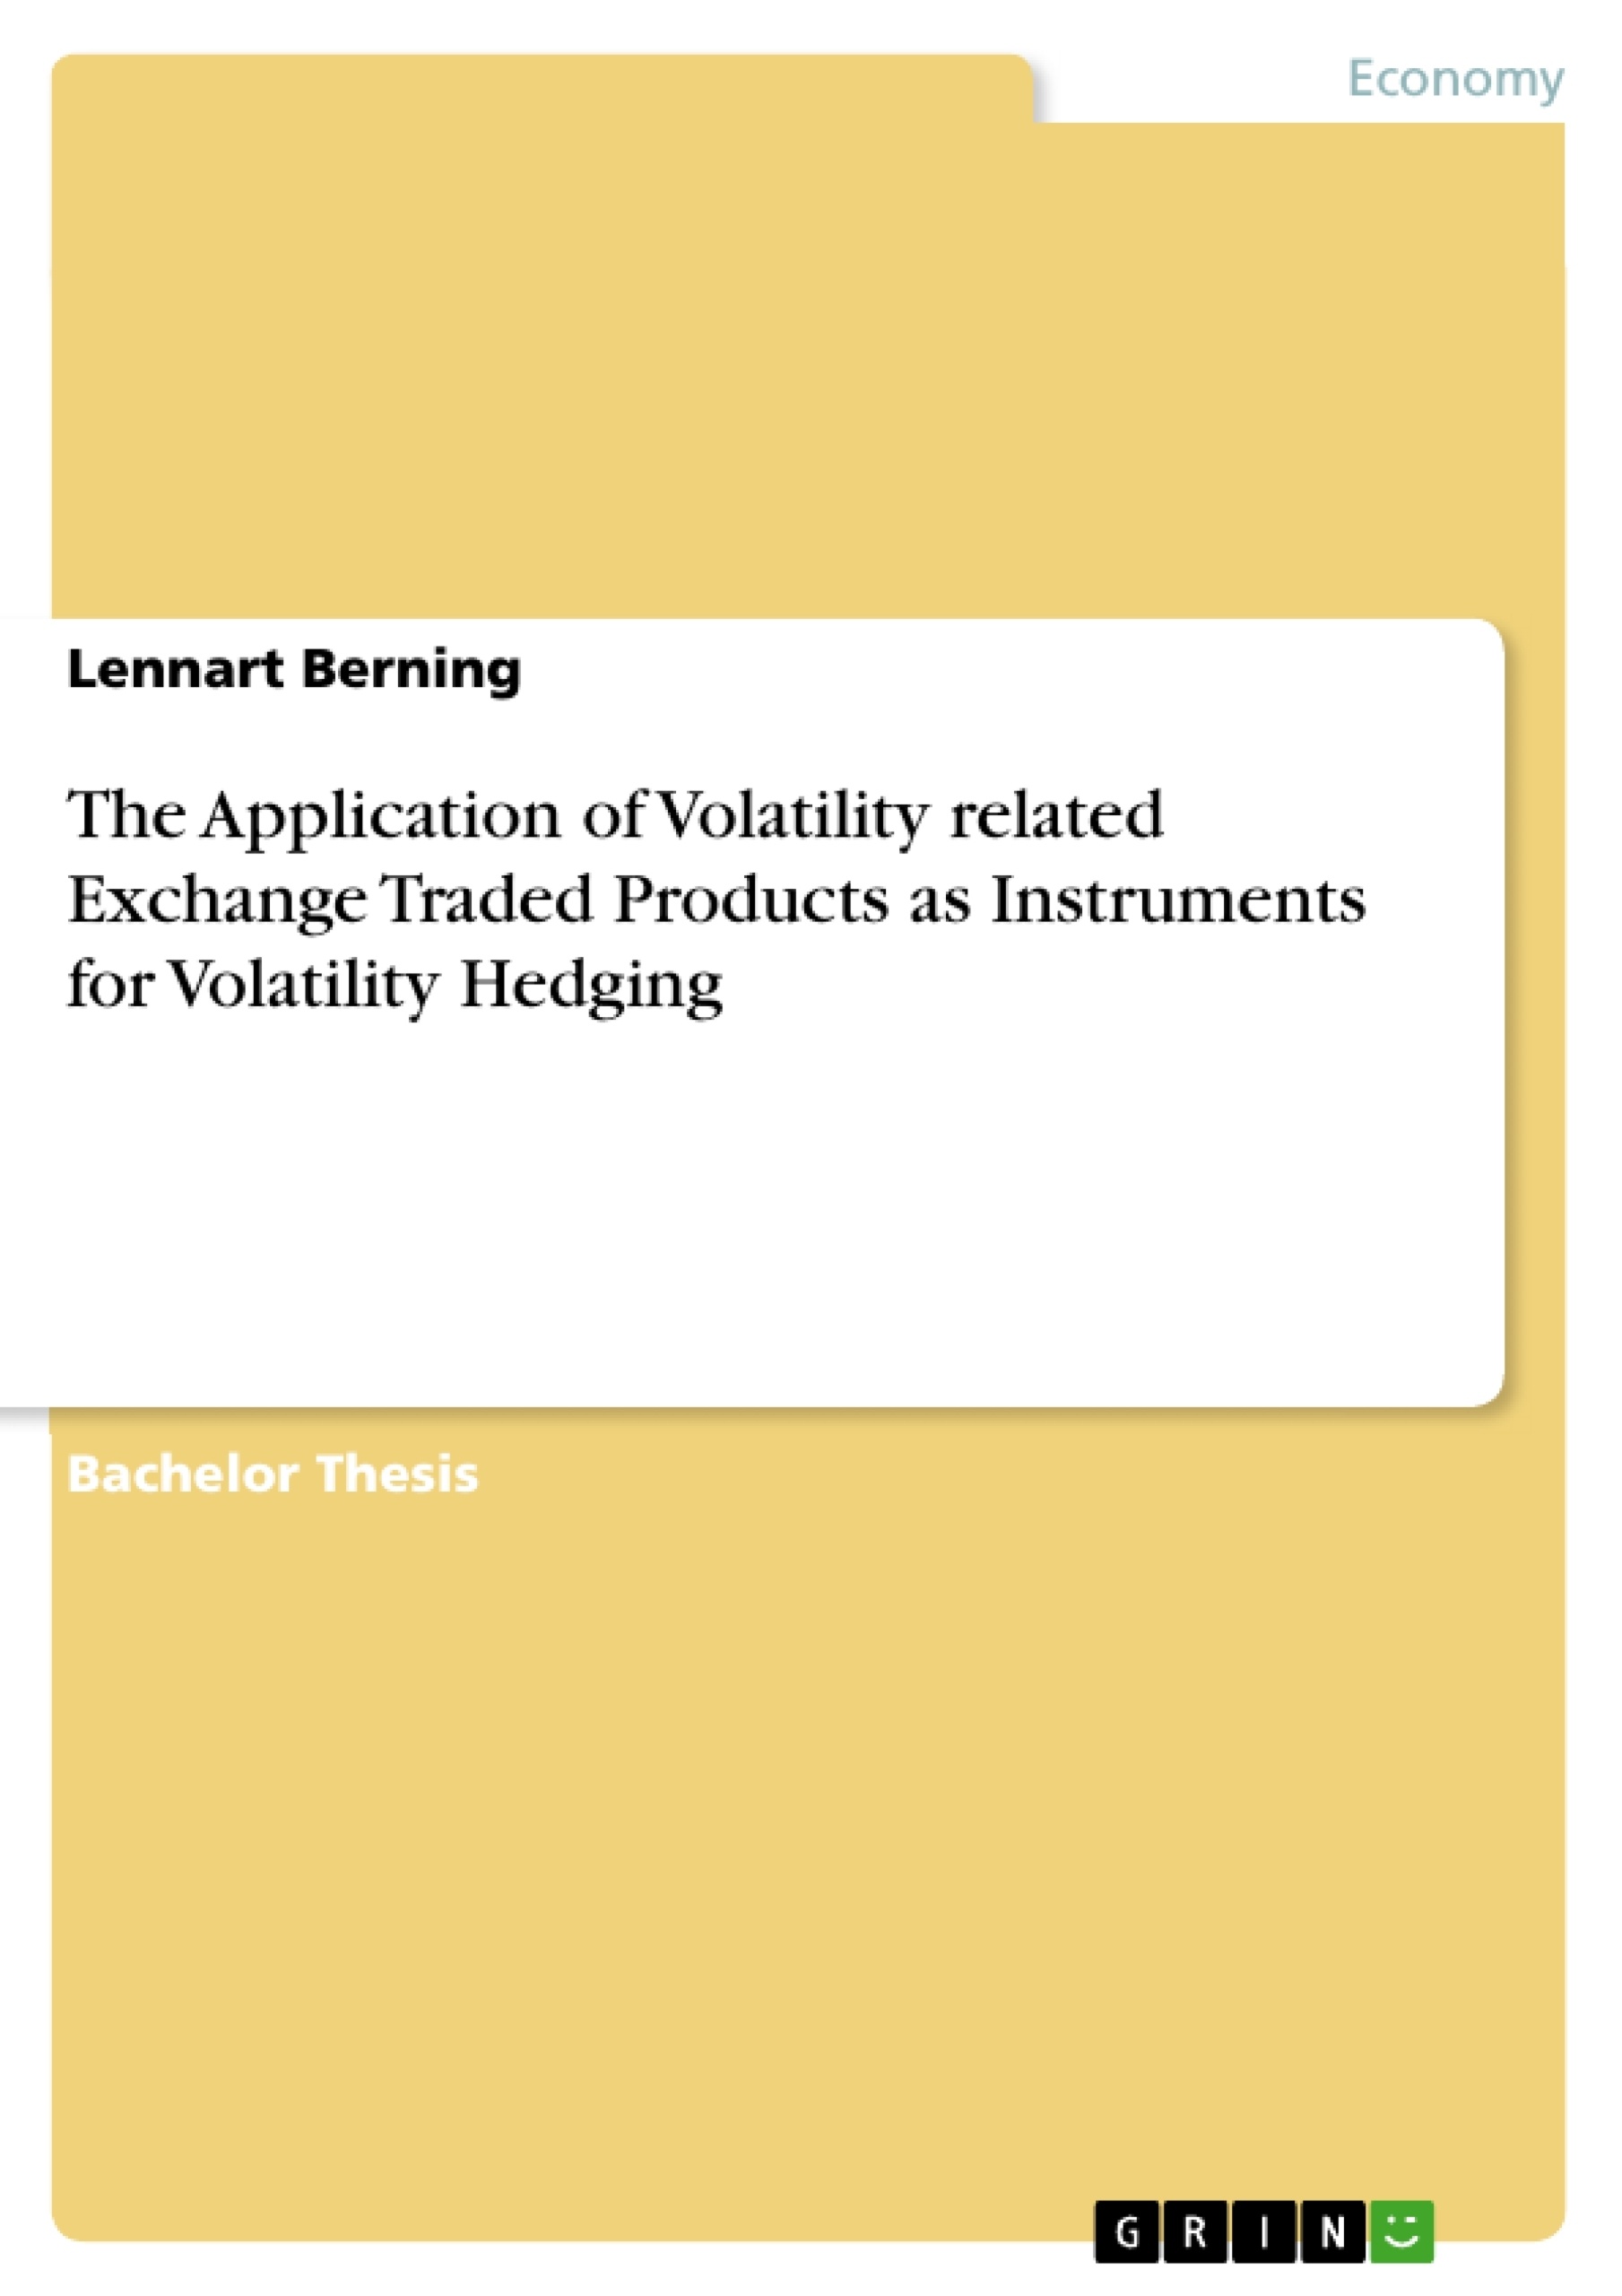 Título: The Application of Volatility related Exchange Traded Products as Instruments for Volatility Hedging